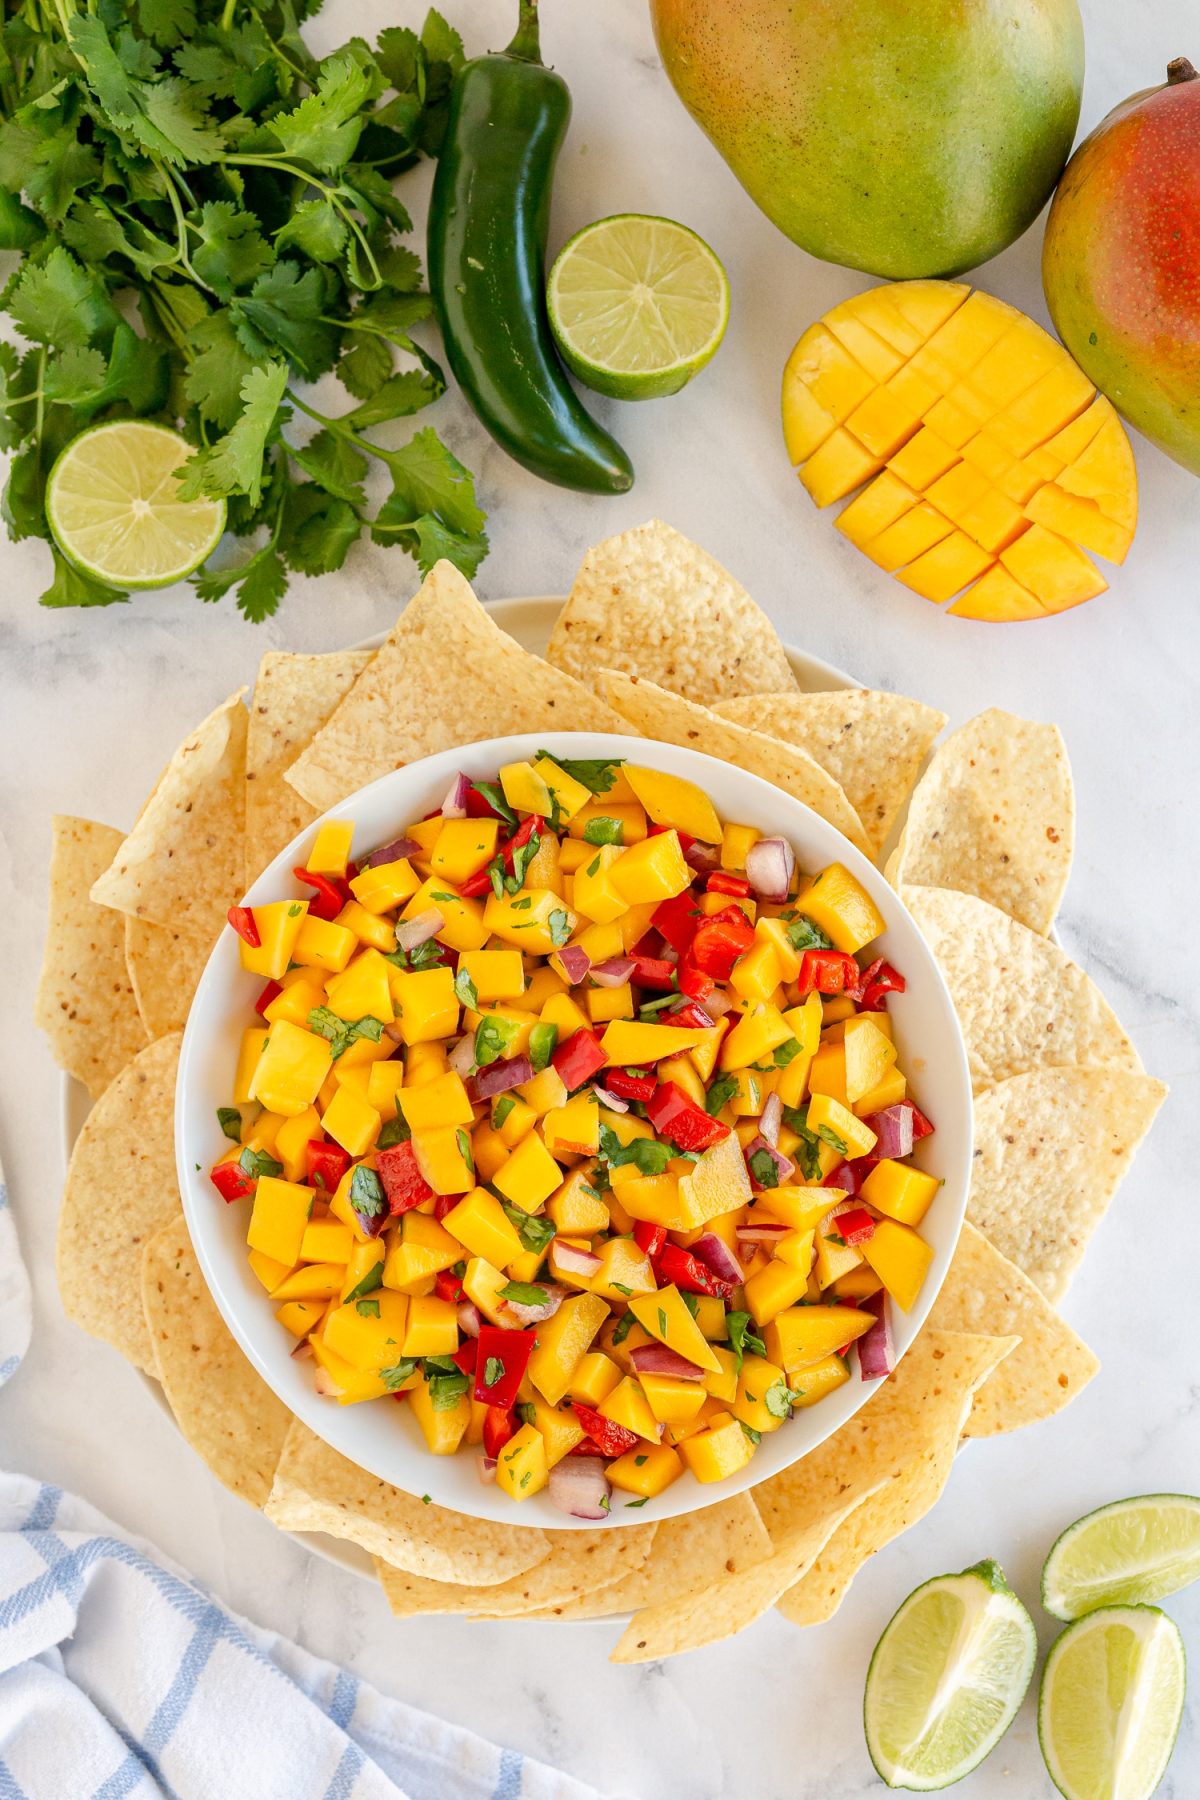 Mango salsa in bowl with tortilla chips around it. Cut up mango next to bowl